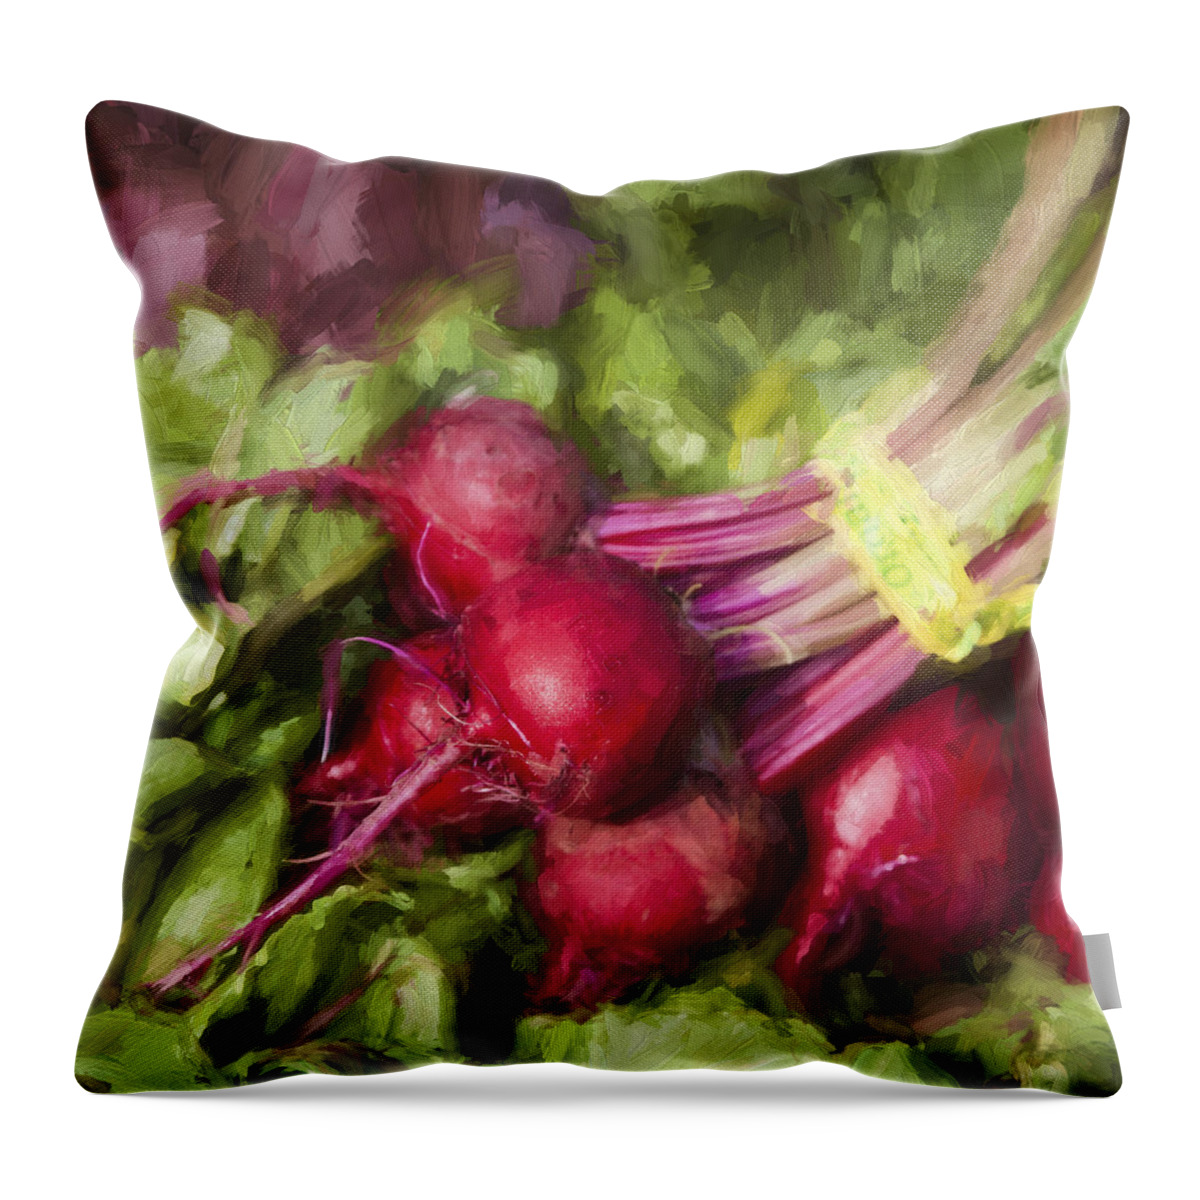 Farmers Throw Pillow featuring the digital art Farmers Market Beets Square Format by Carol Leigh